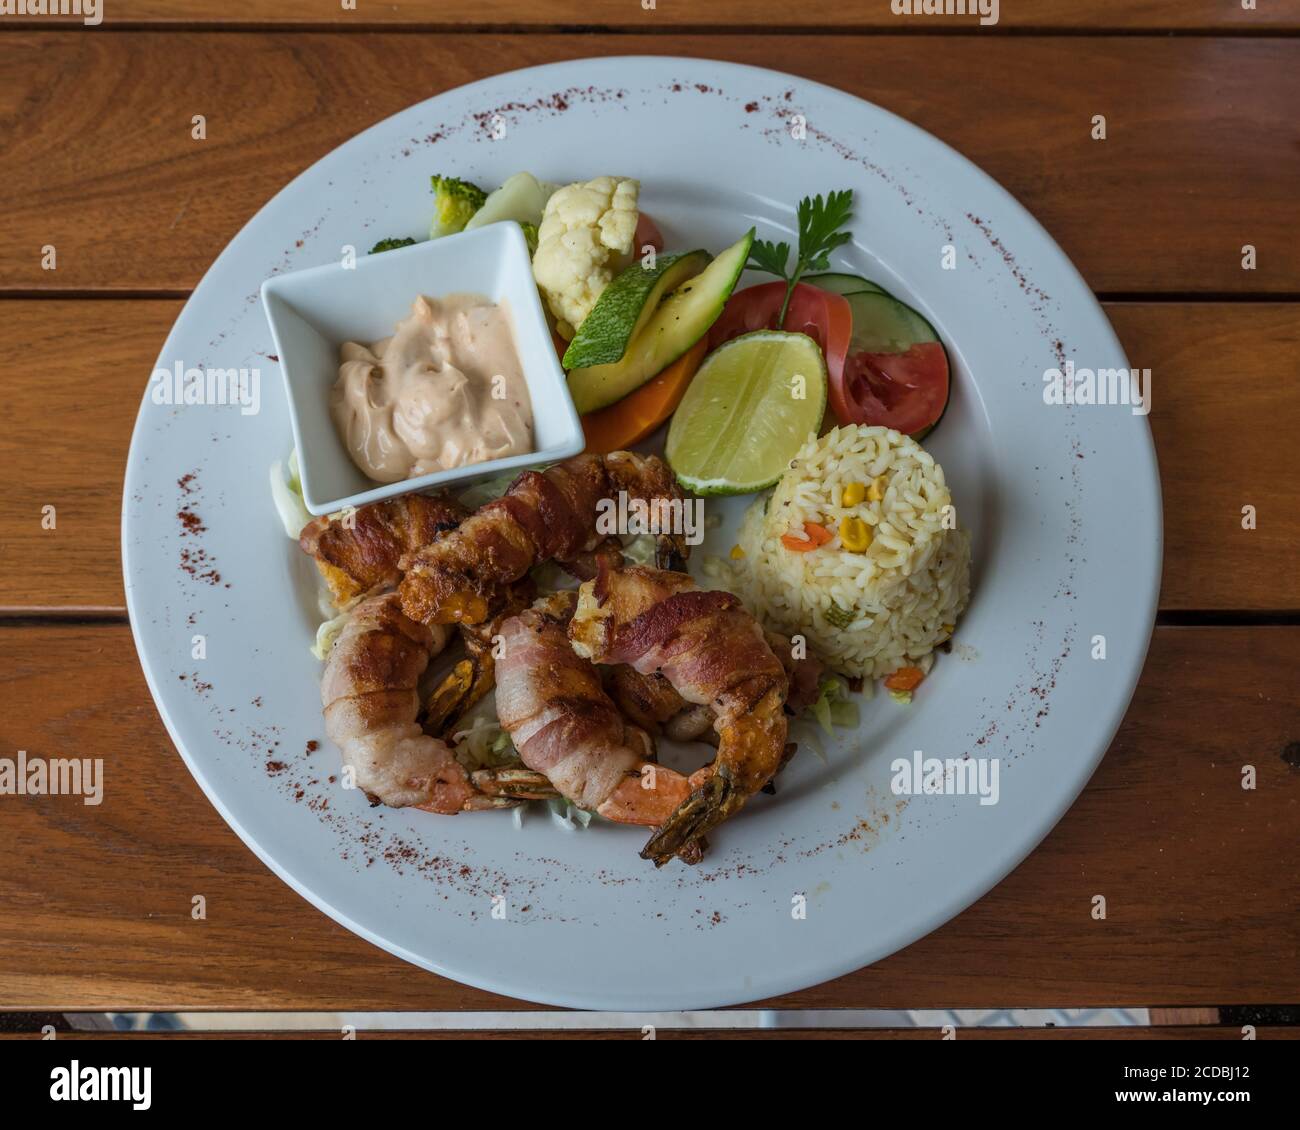 Bacon-wrapped shrimp with a lime, rice and vegetables by the Caribbean in Mexico. Stock Photo